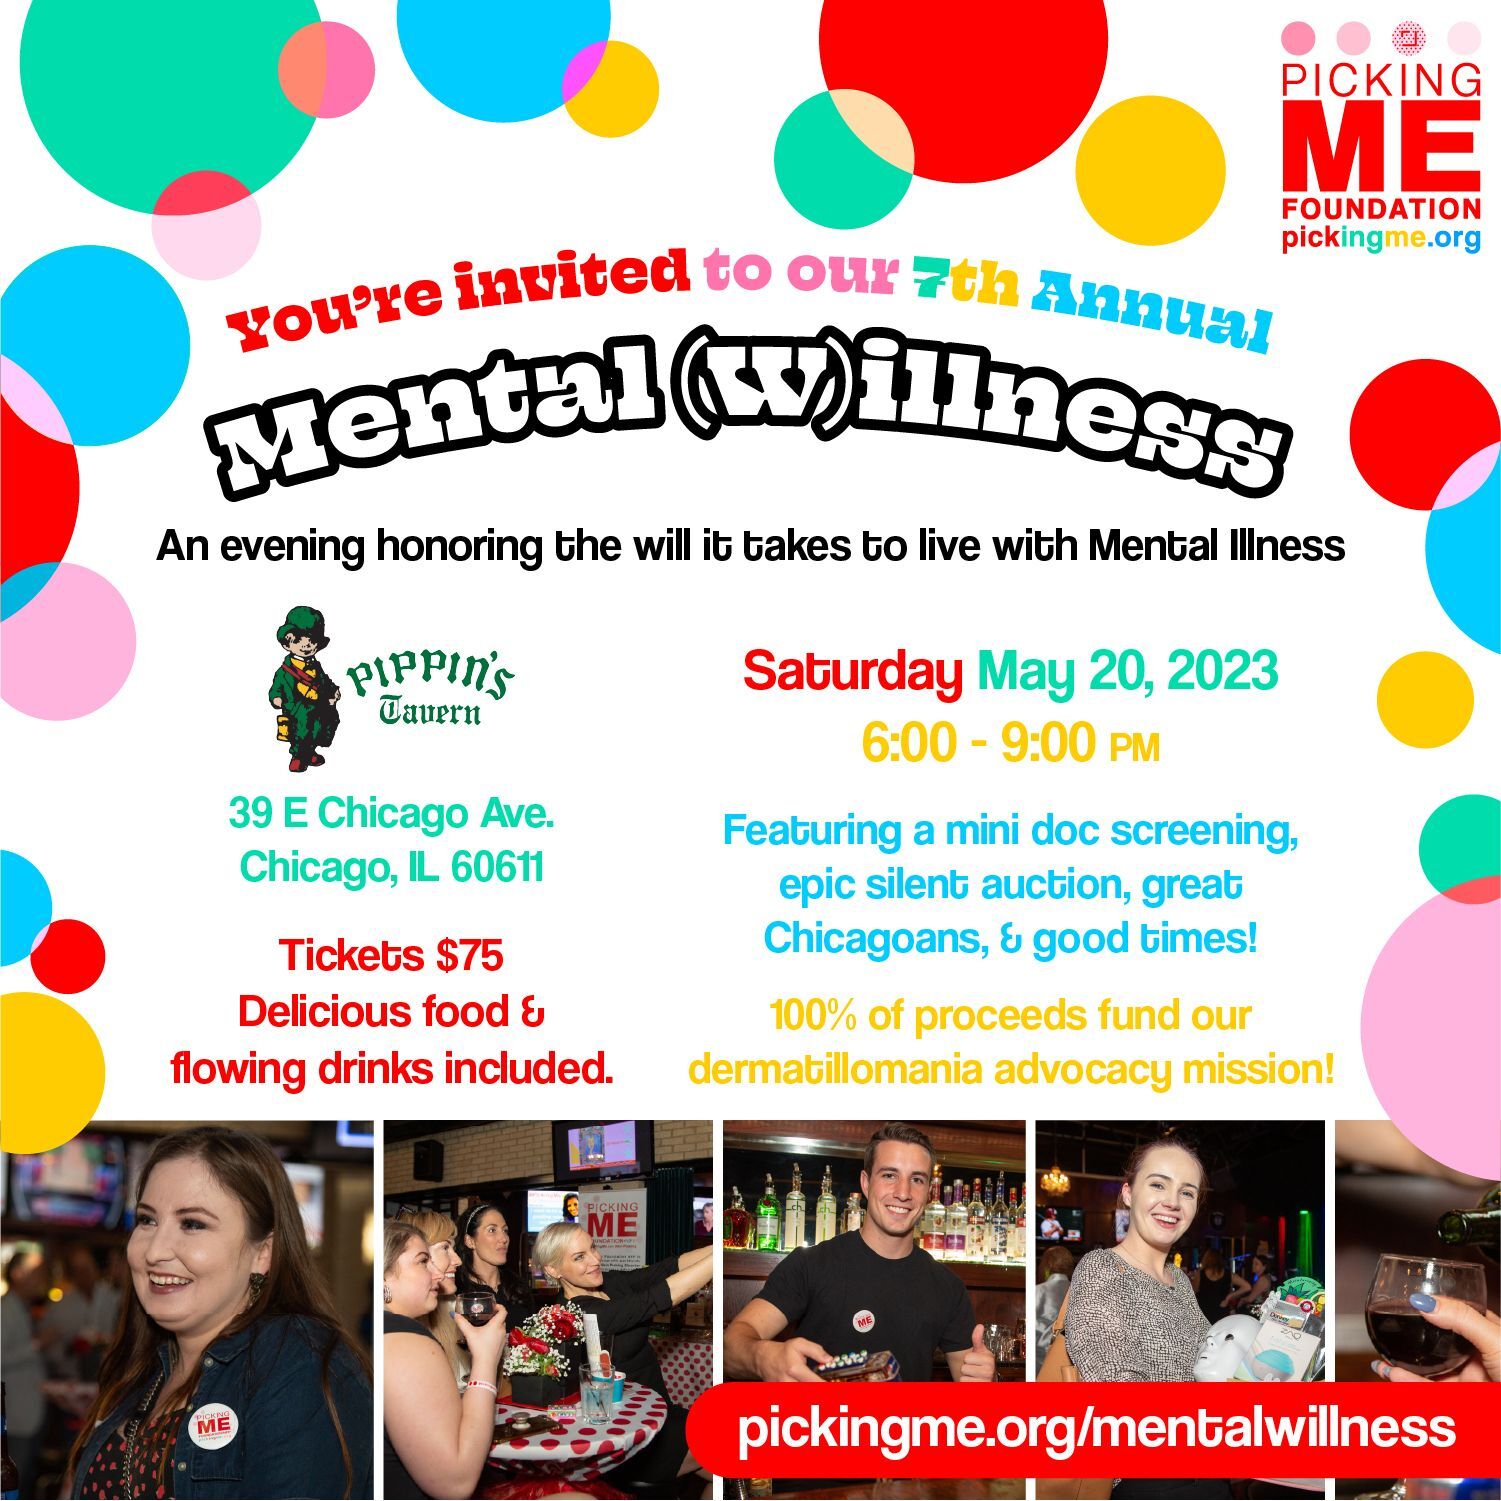 Join us for our 7th Annual Mental Willness Event! It's Saturday, May 20th from 6-9 PM CST, at Pippin's Tavern at 39 E Chicago Ave. 